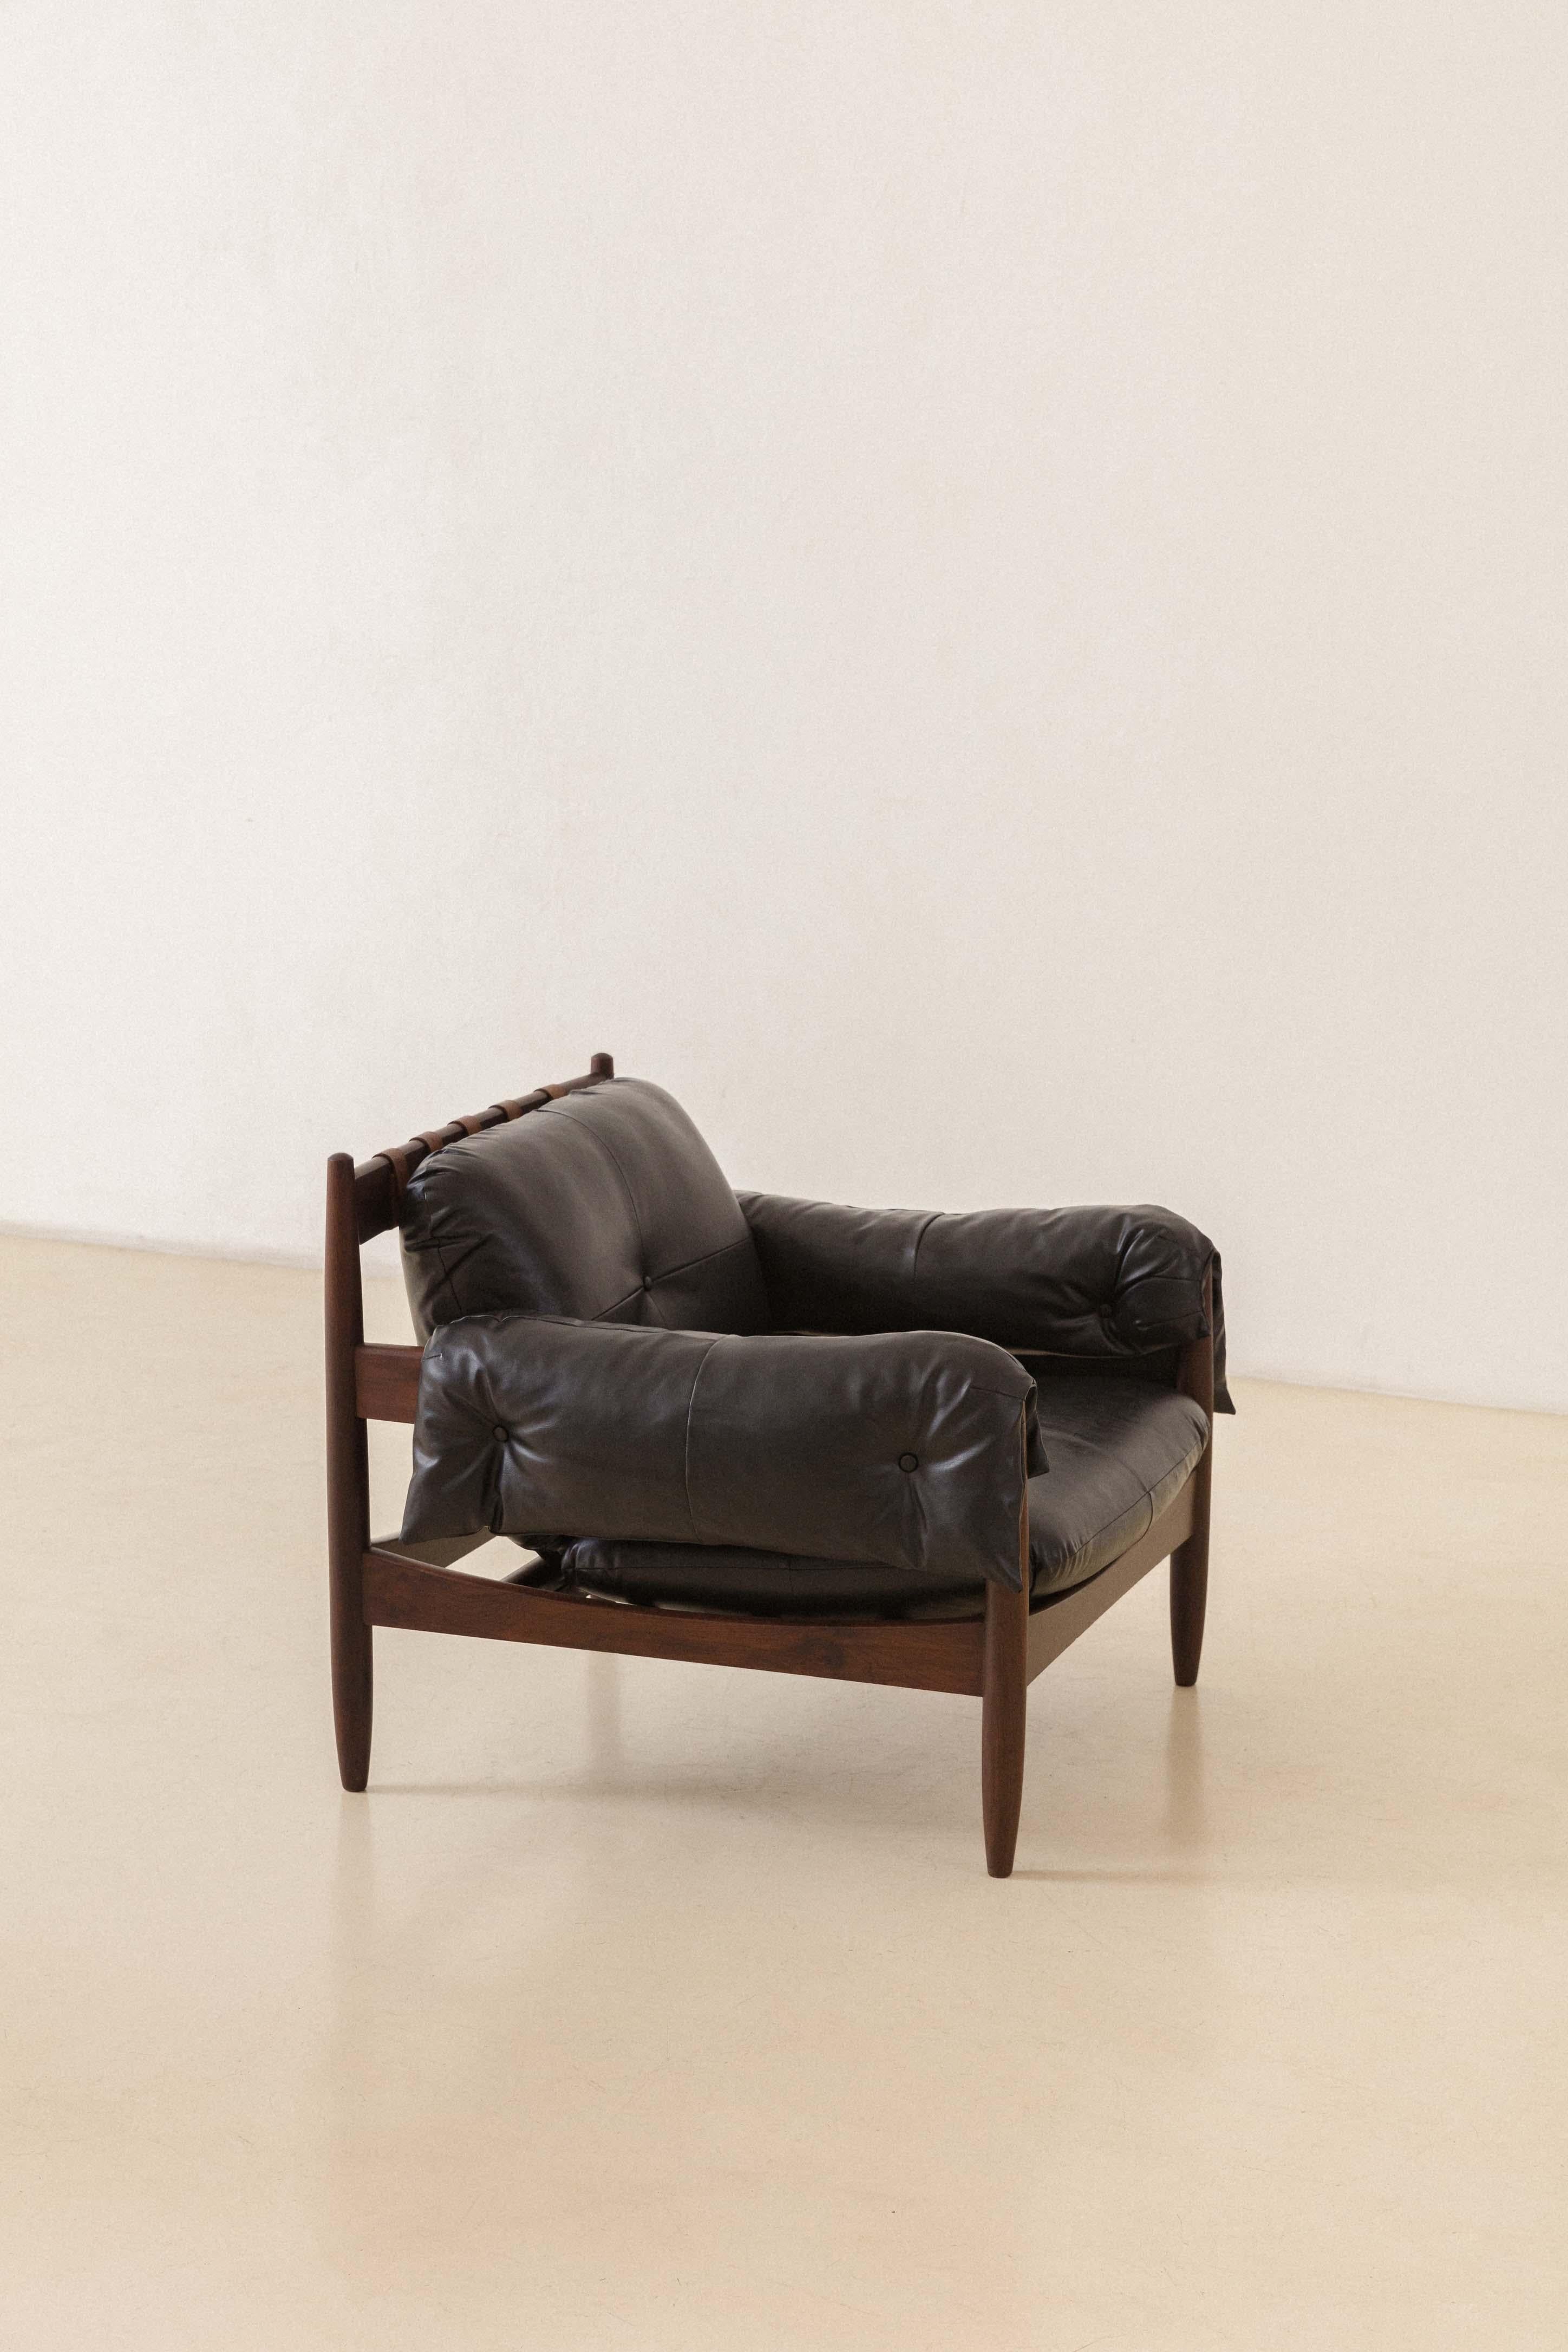 Leather Vintage Pair of Meia Pataca Rosewood Armchairs by Sergio Rodrigues, 1960, Brazil